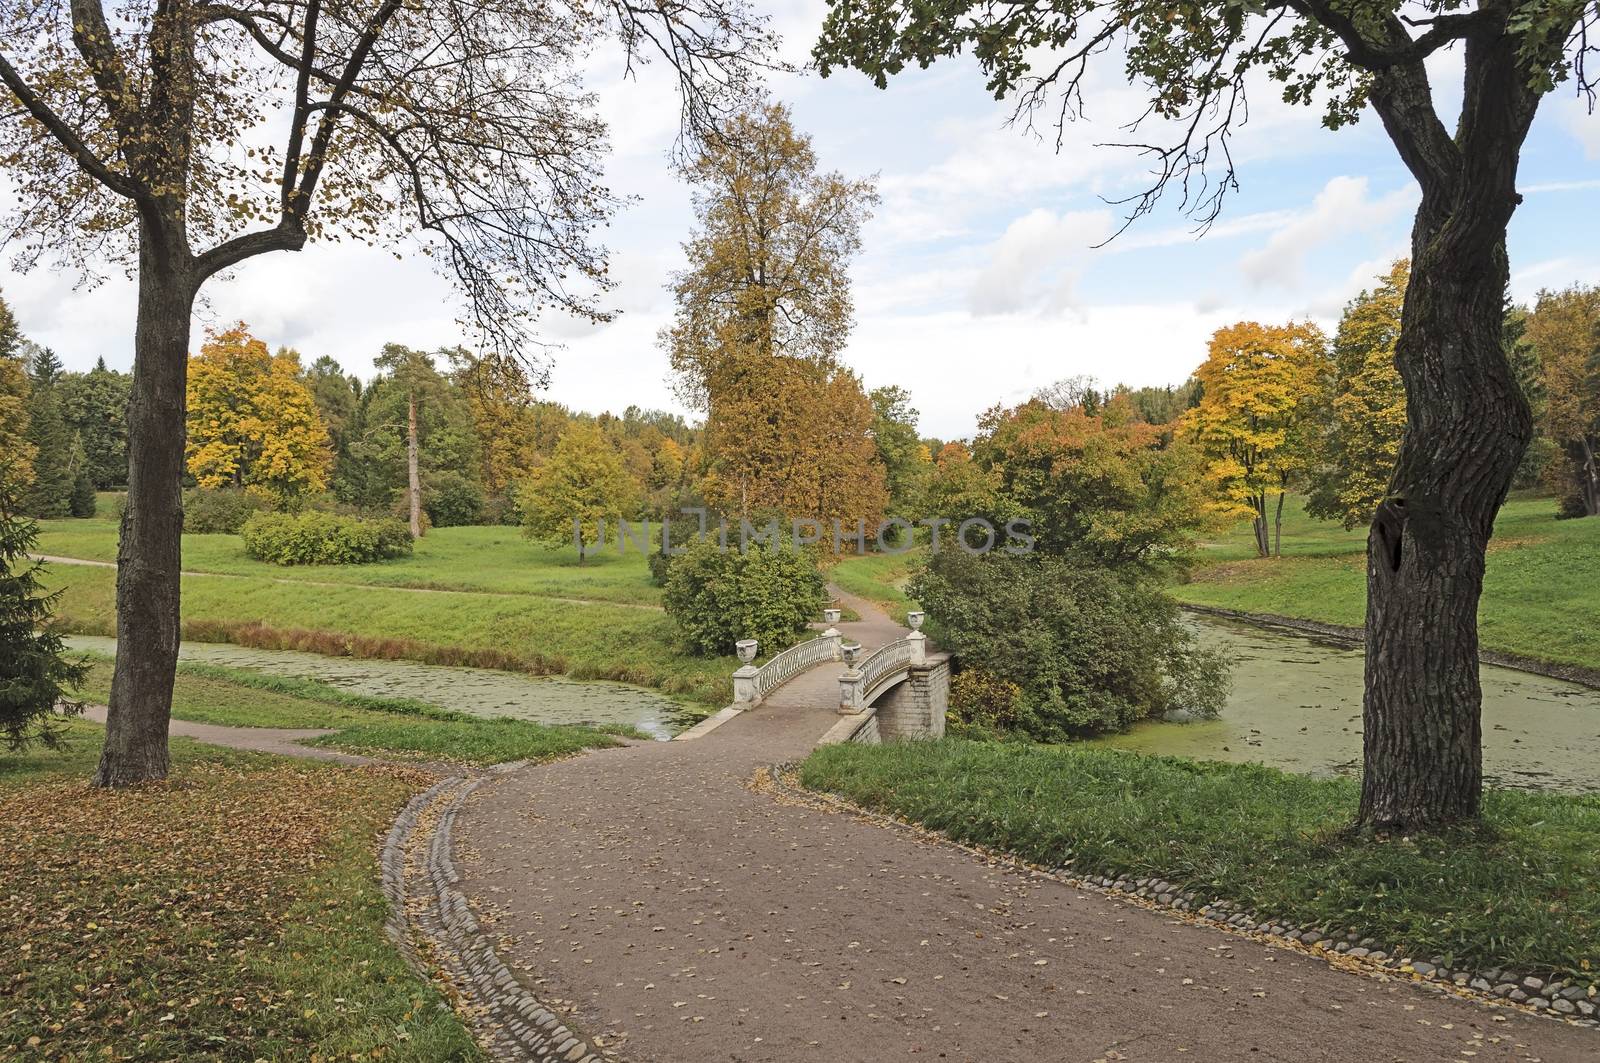 Footpath in old park, autumn by wander